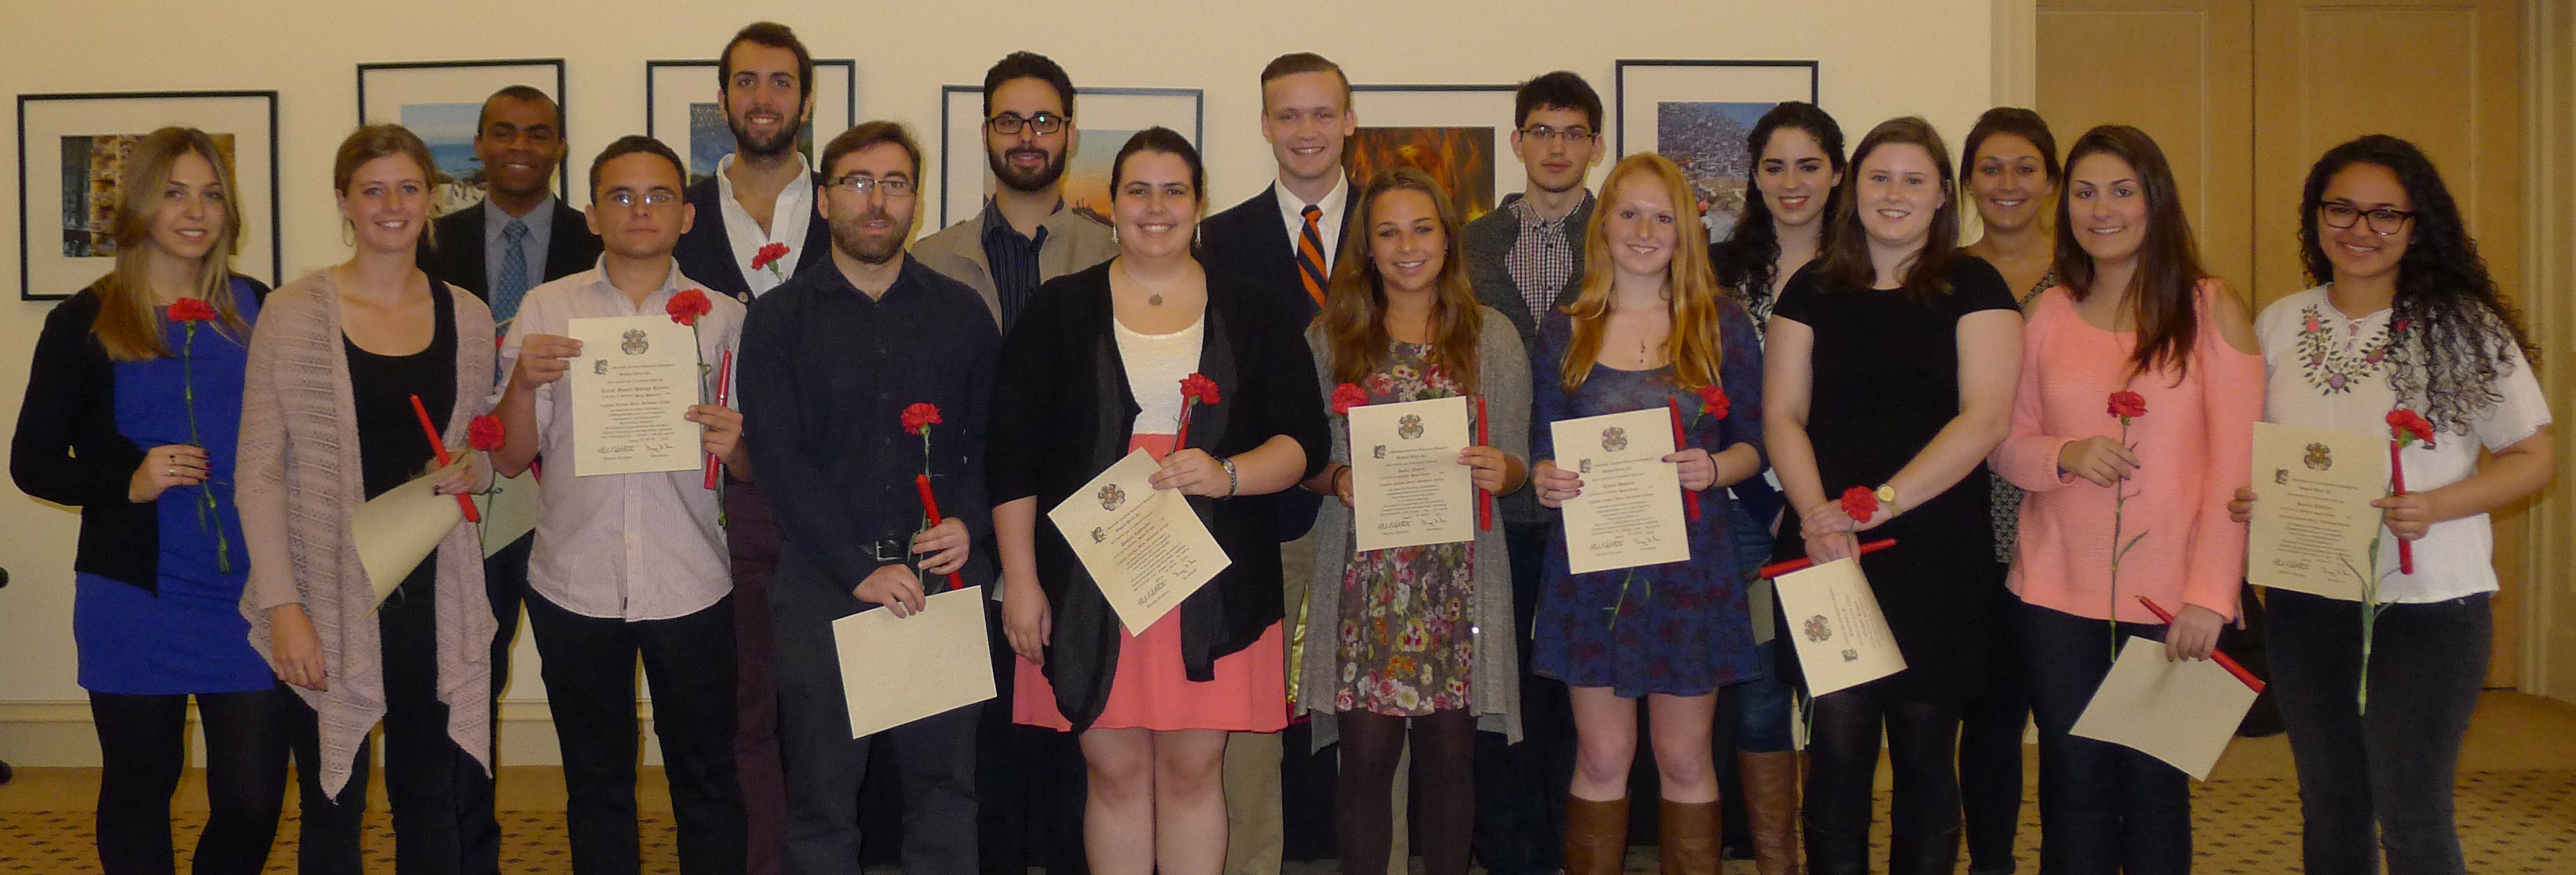 New member of Sigma Delta Pi stand holding their certificates, carnations, red candles and pins after the ceremony.